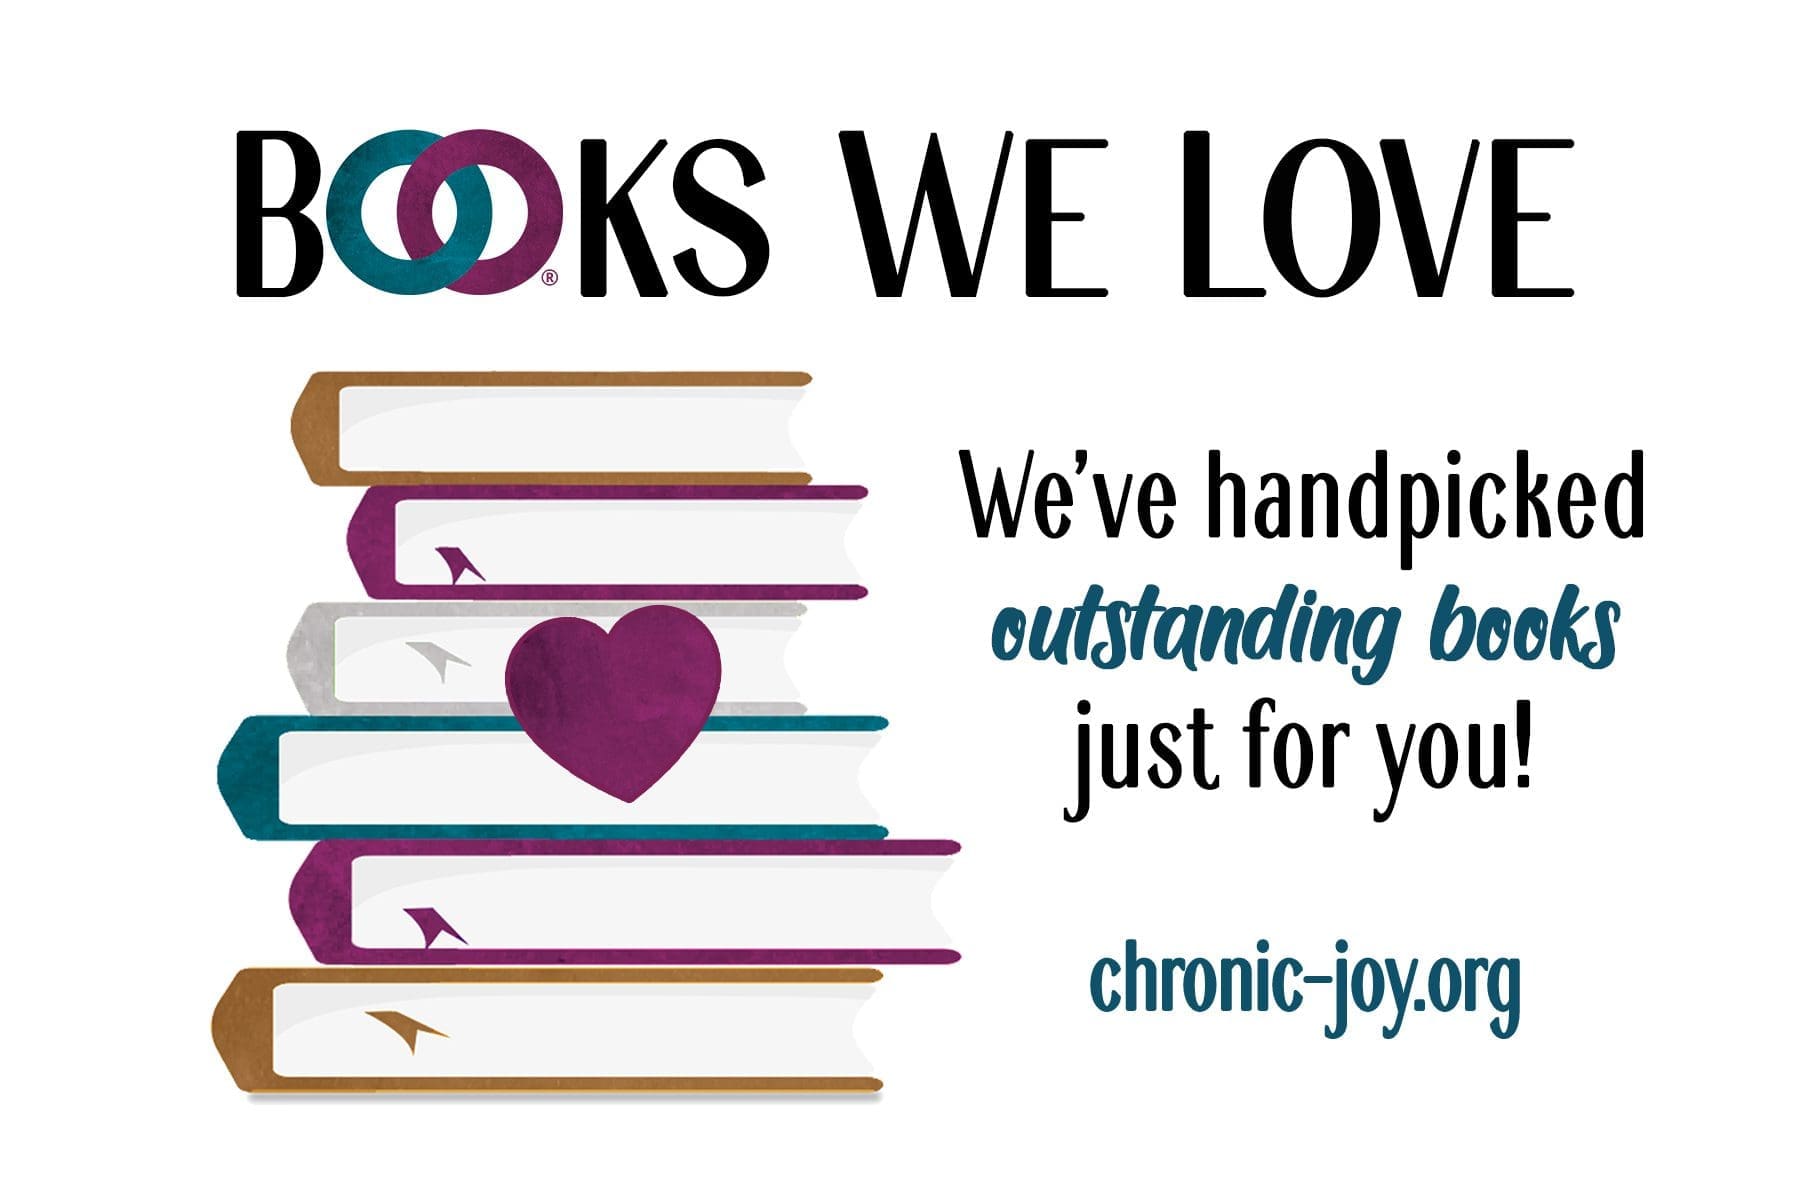 Books We Love - Handpicked just for you!